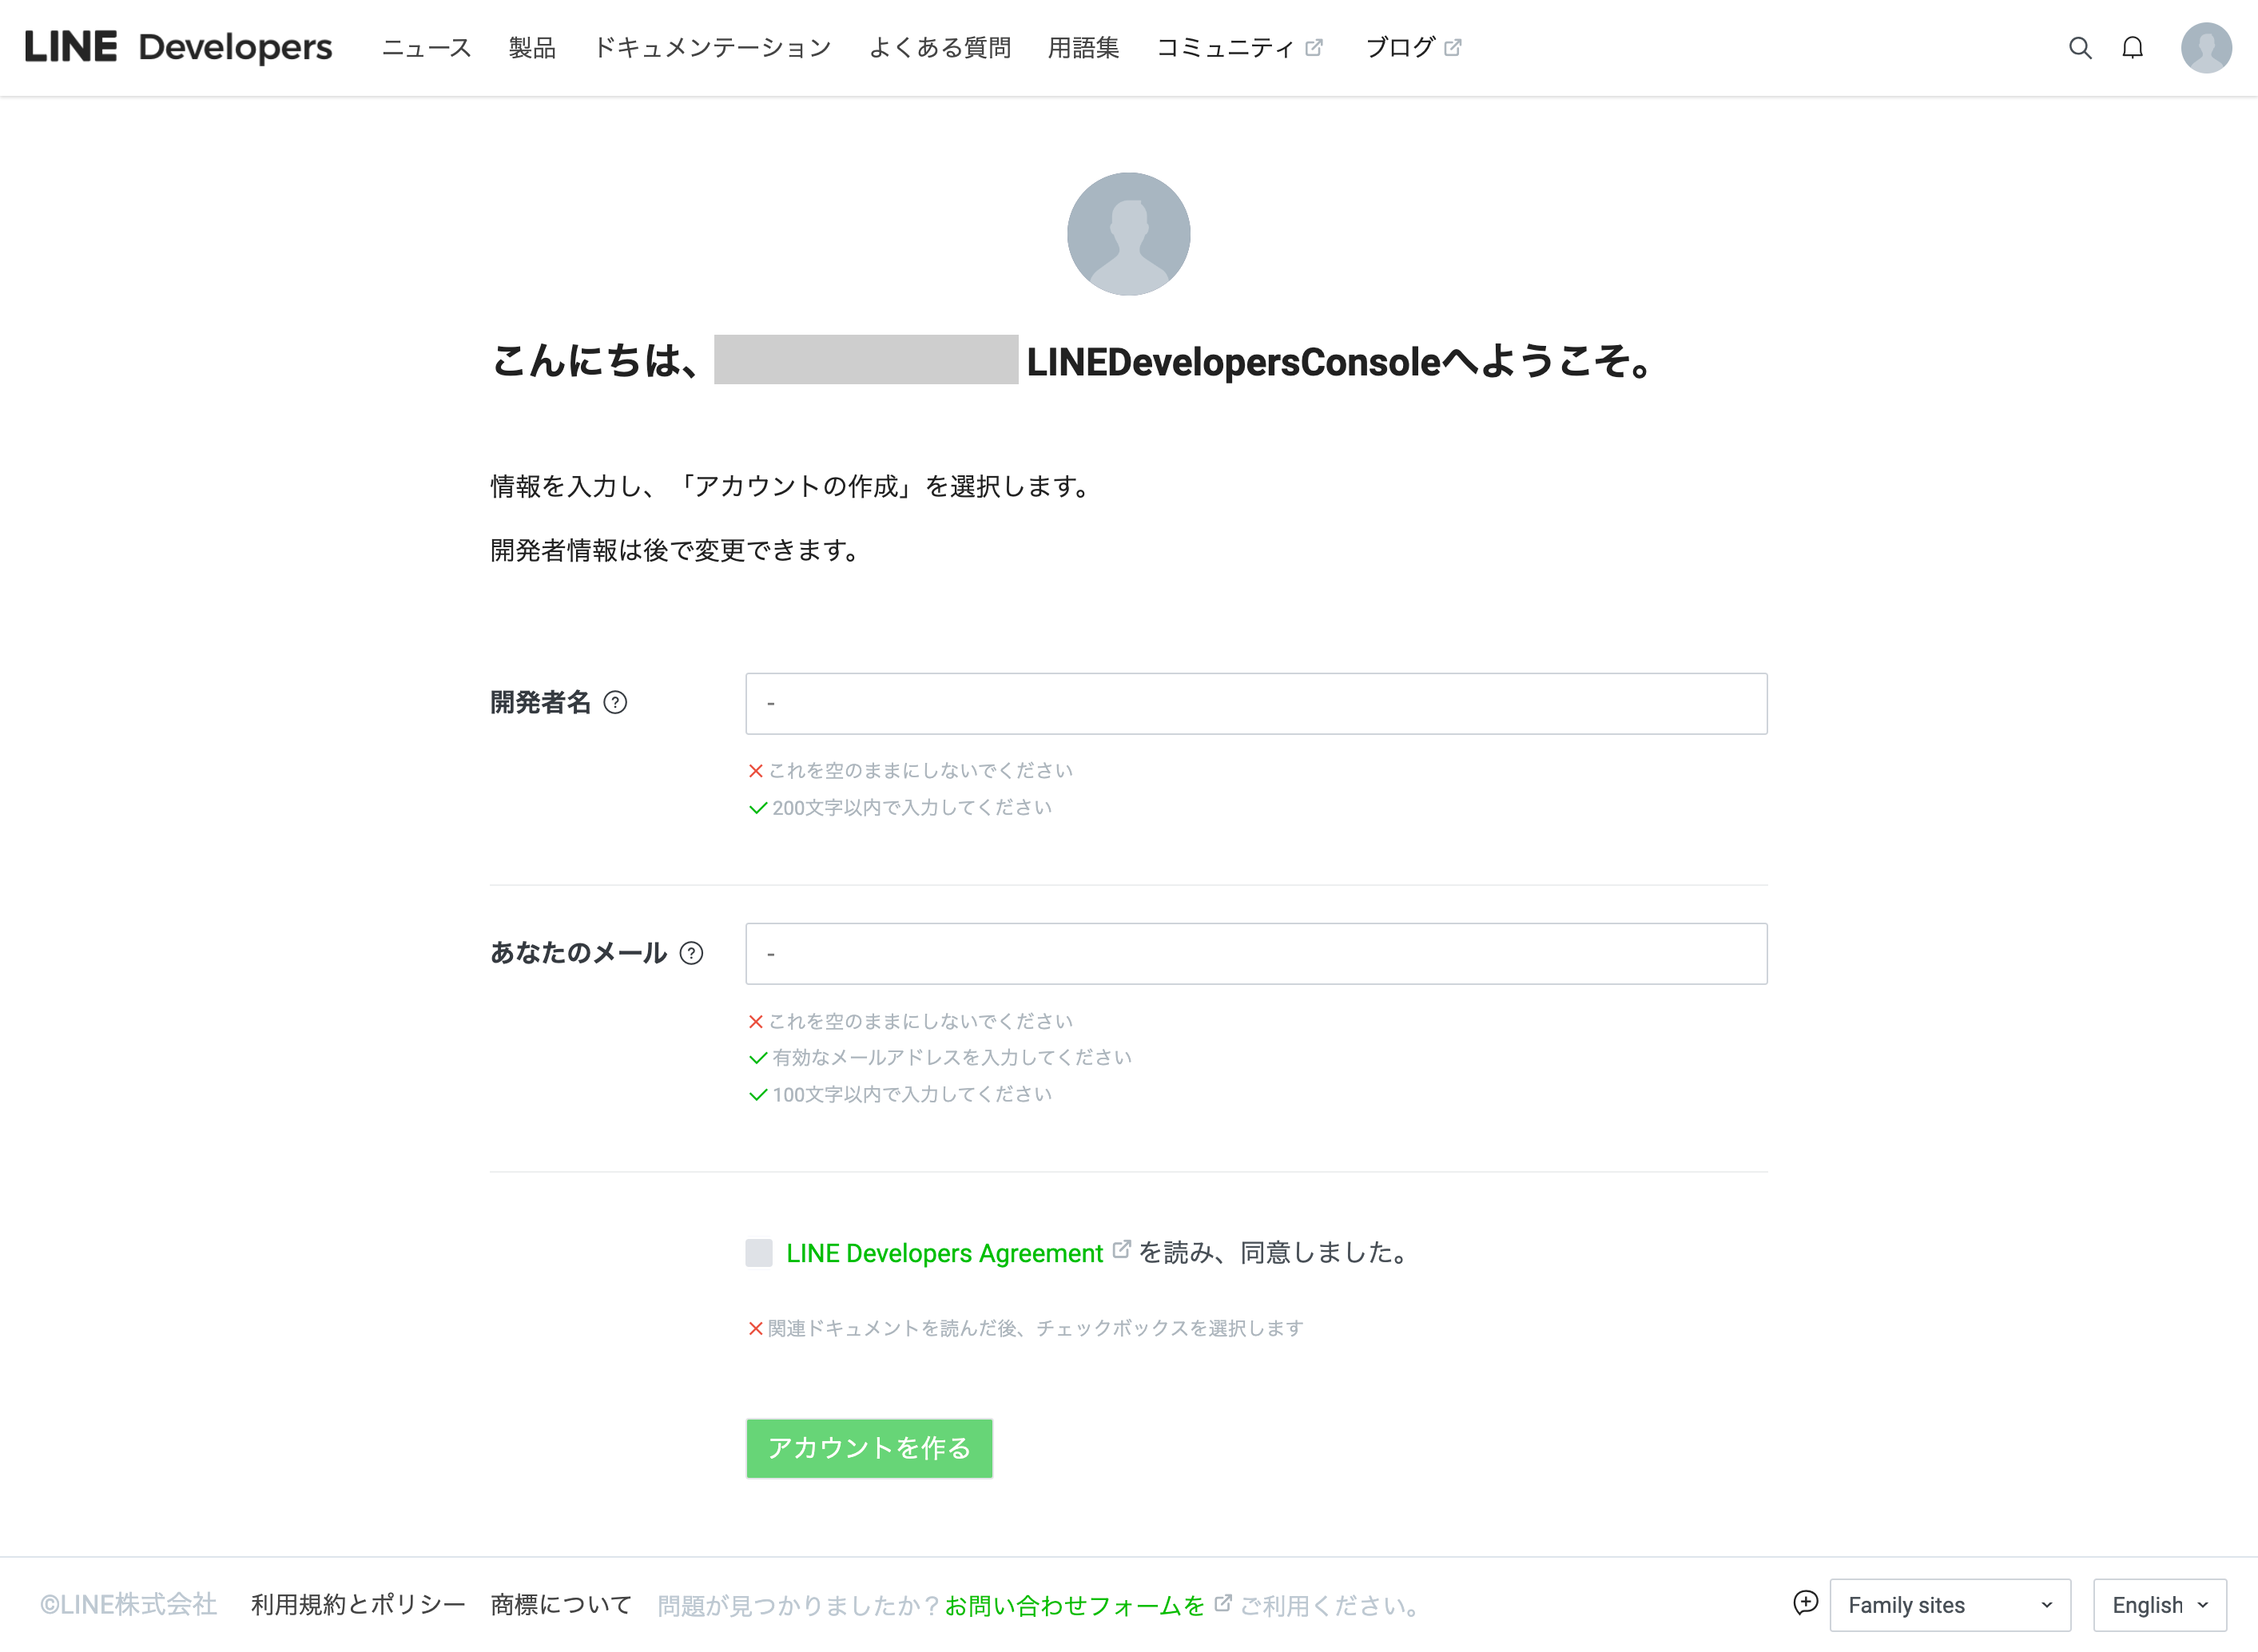 LINE-Deveoppers-console登録画面